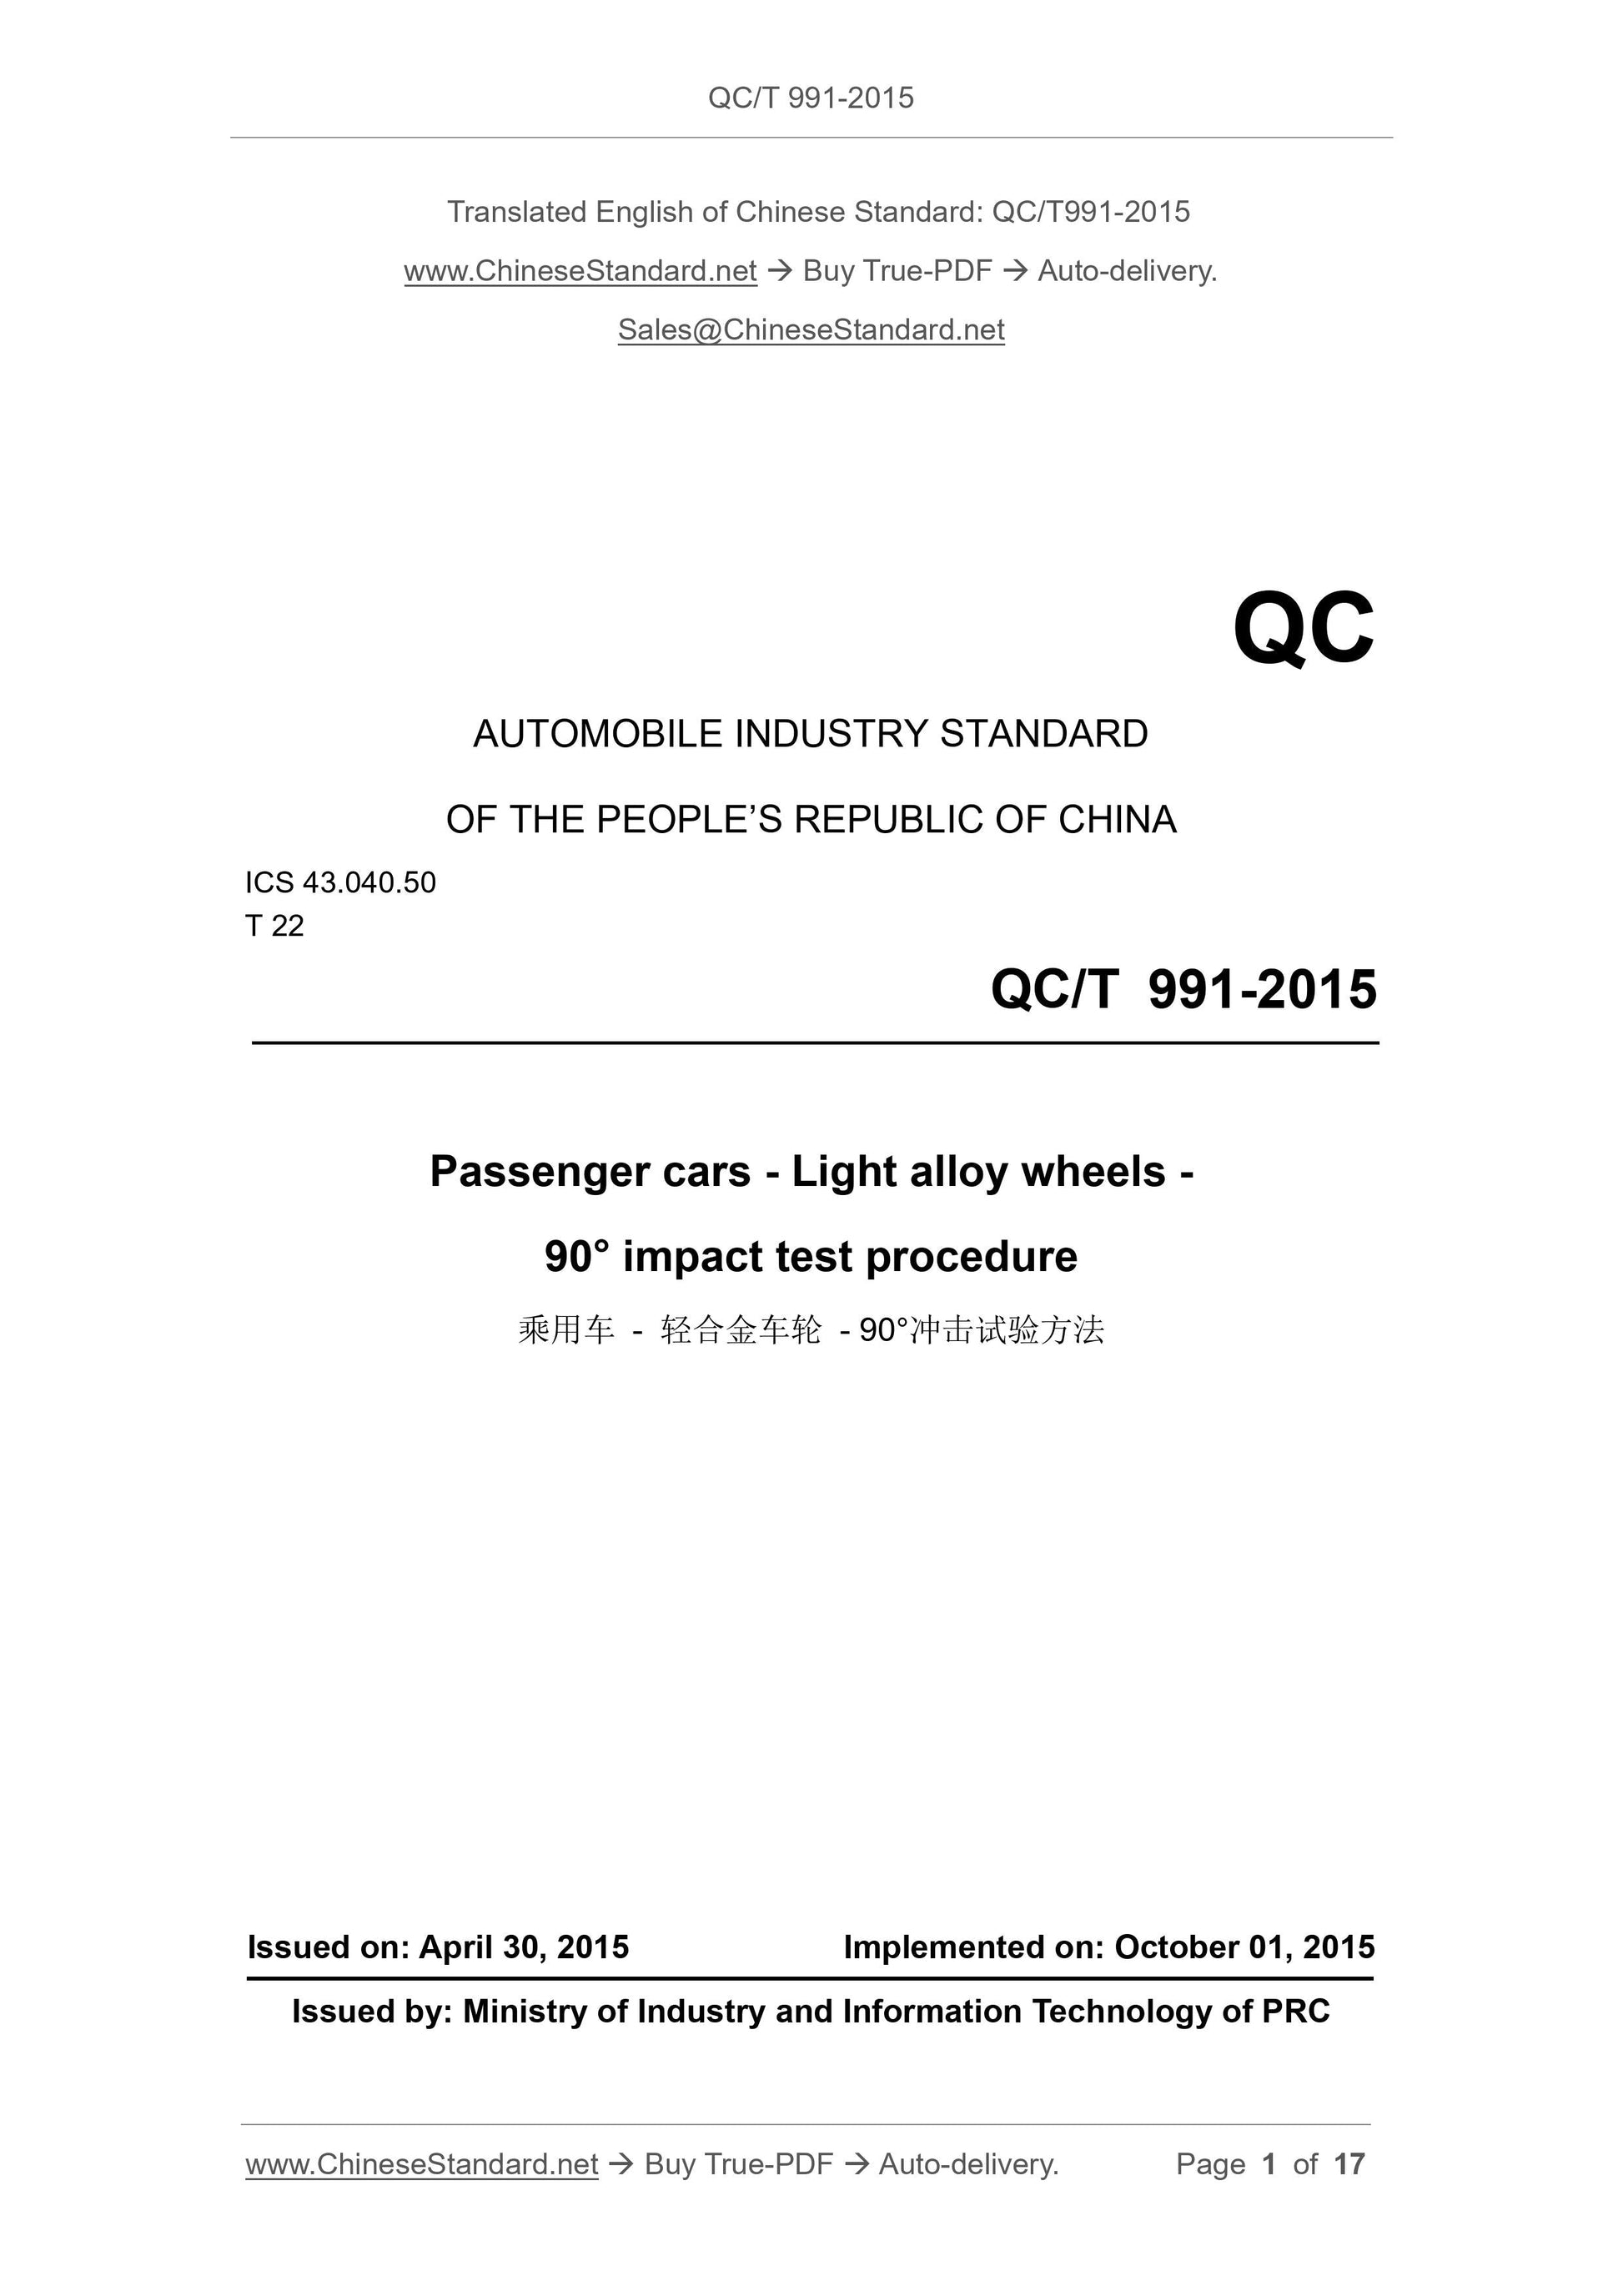 QC/T 991-2015 Page 1